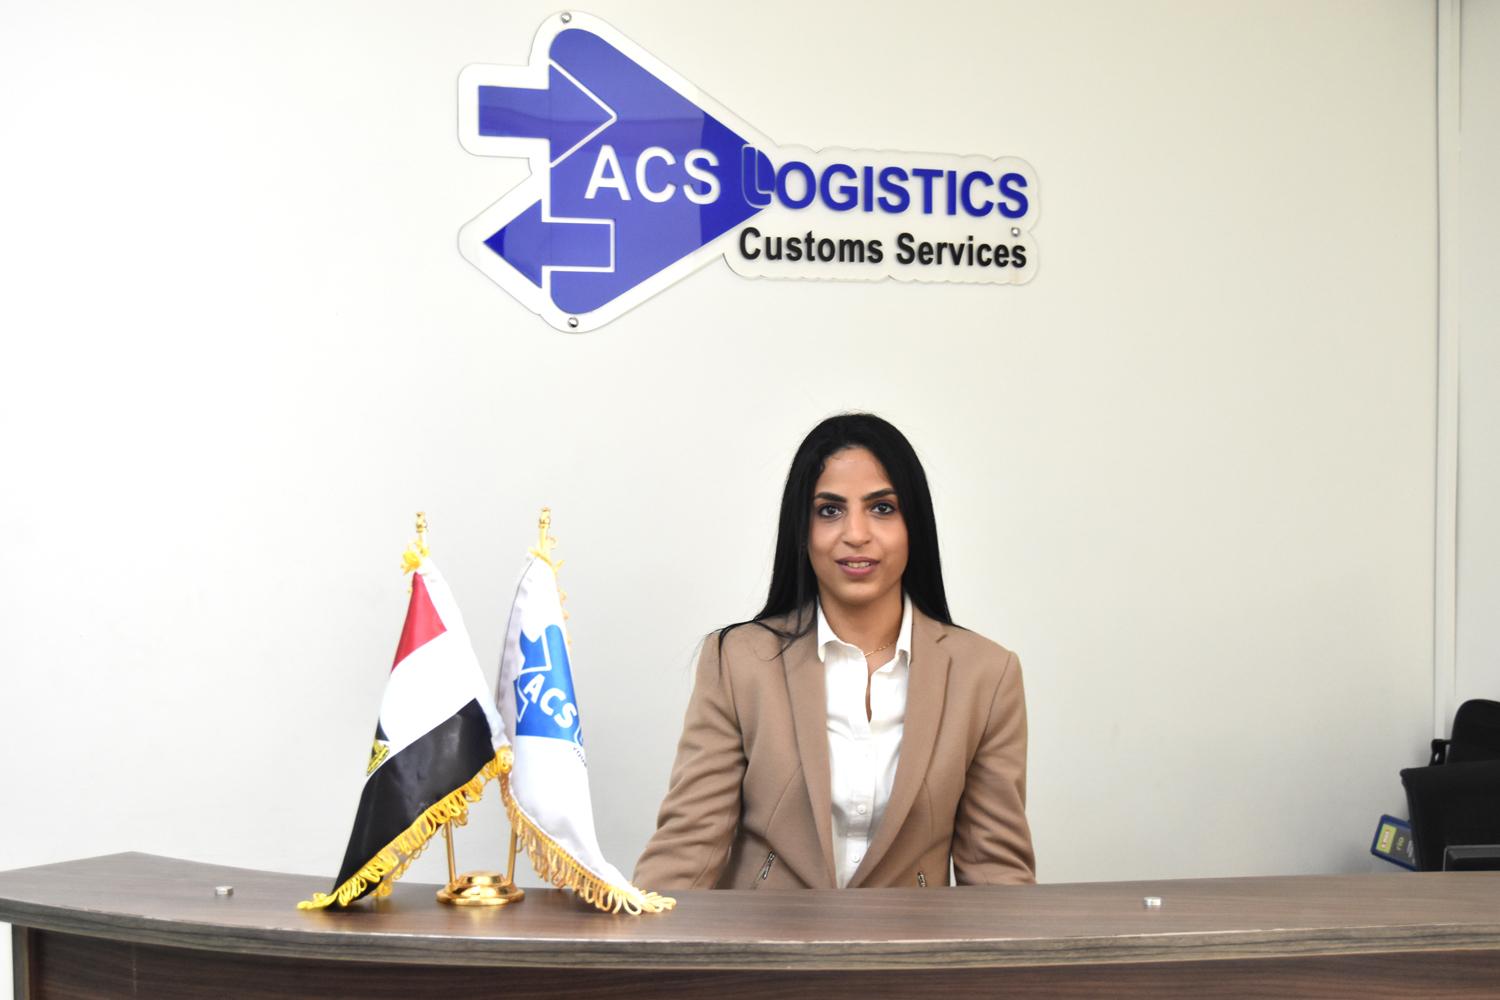 join the Executive secretary and office admin team of experts at ACS who will ensure that your goods reaches its destination safely.